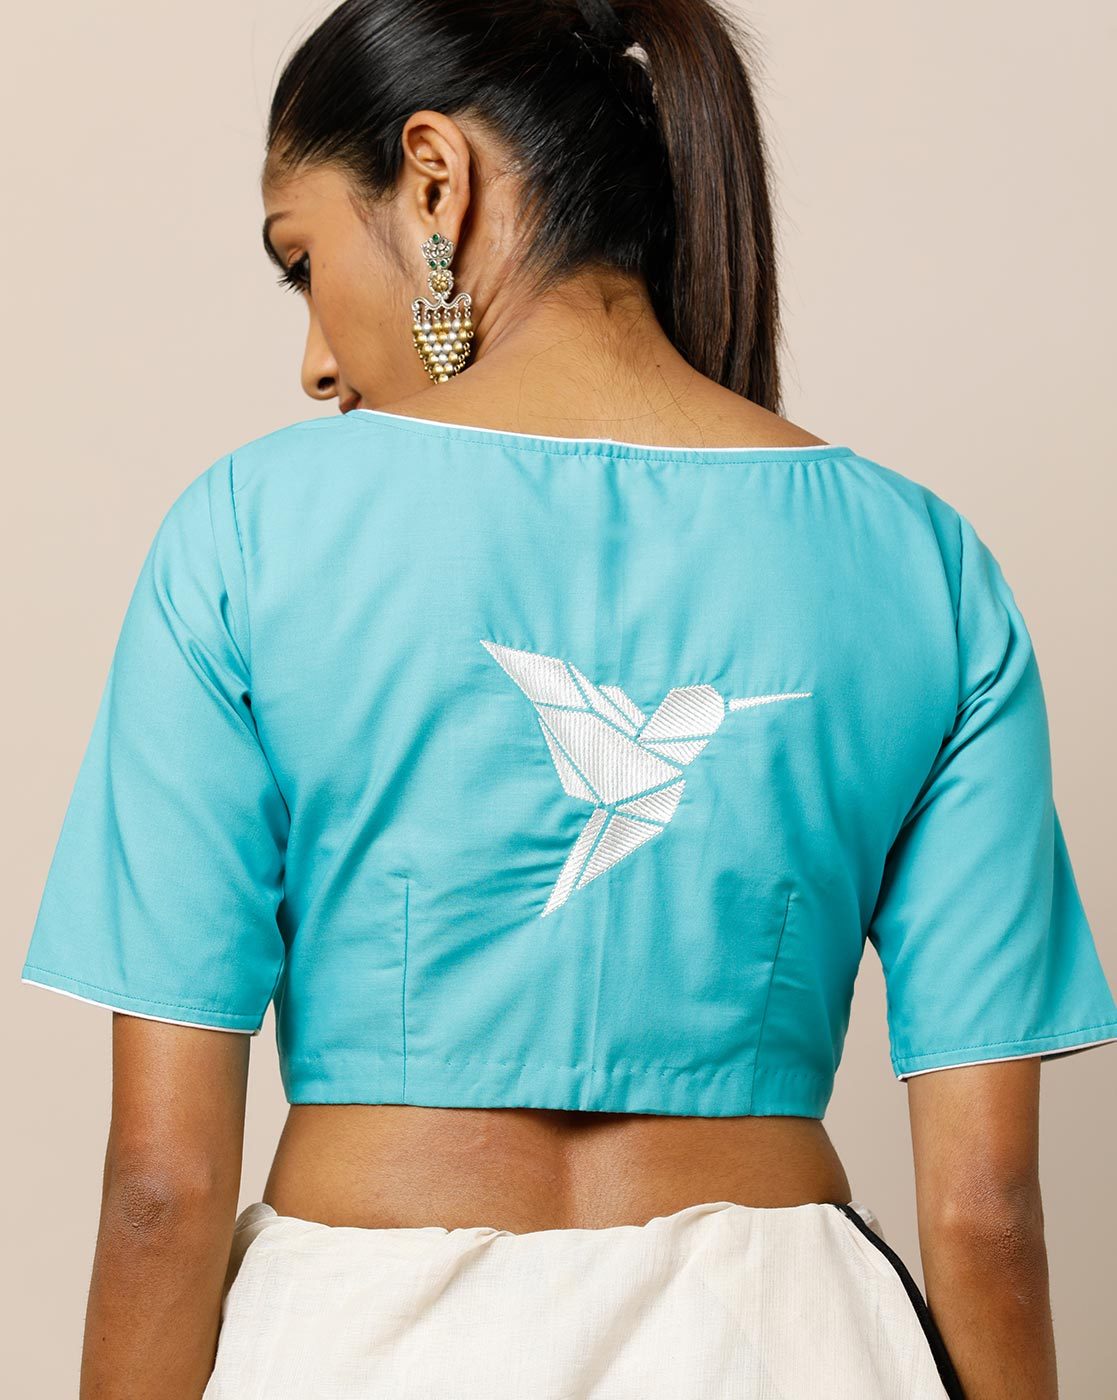 blouse-back-with-embroidery-designs-2019 (4)